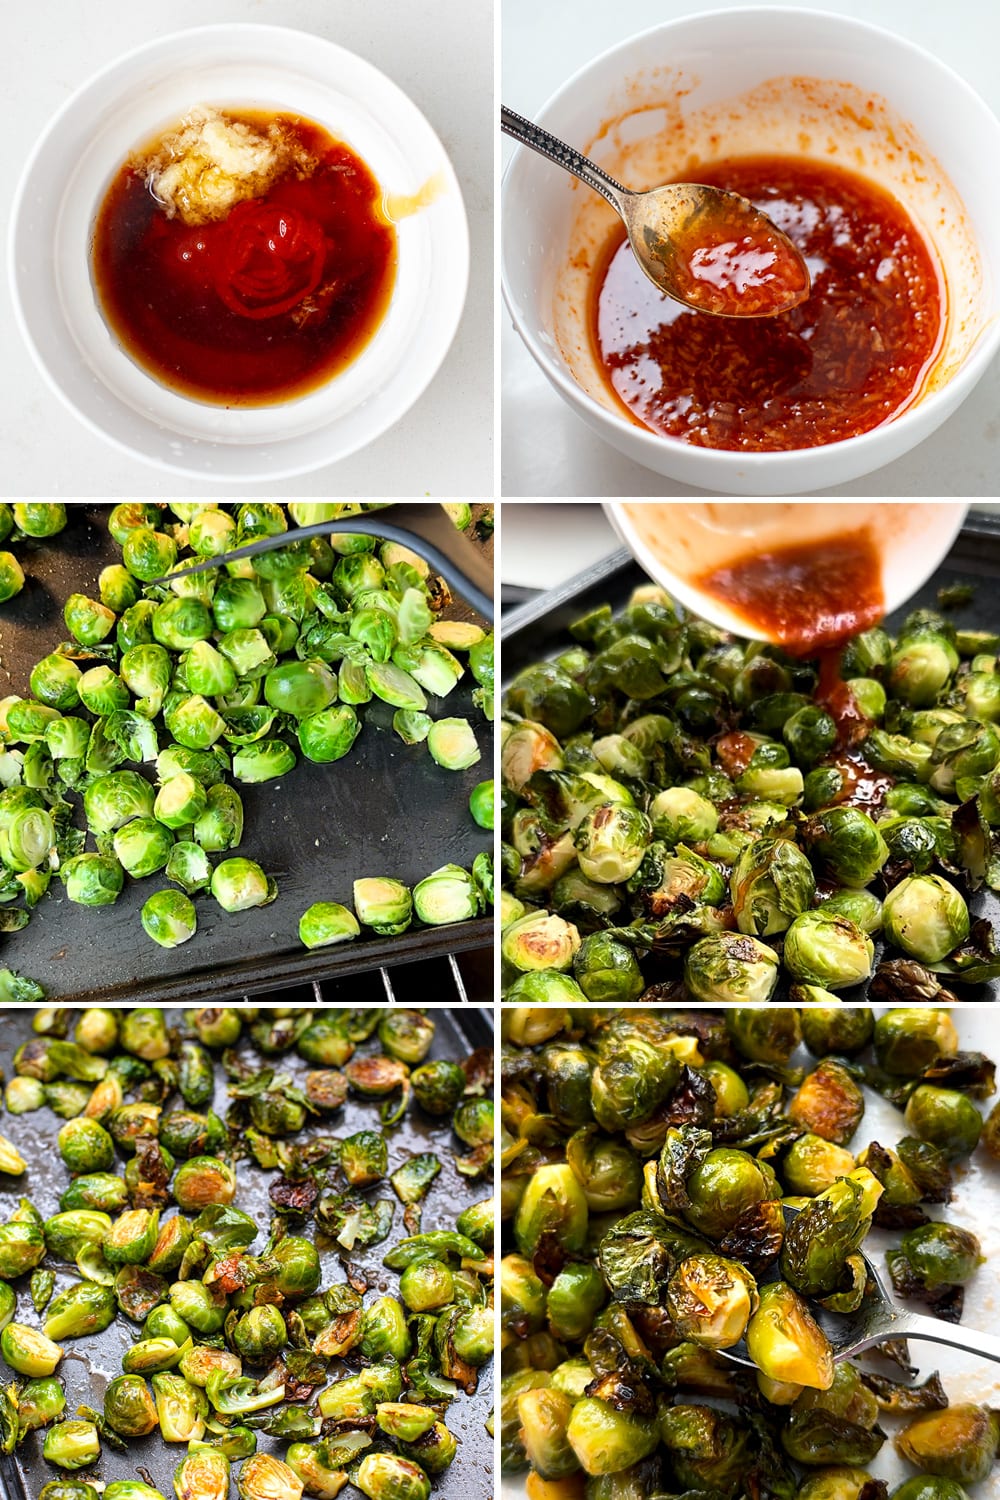 How to make honey sriracha brussels sprouts in the oven